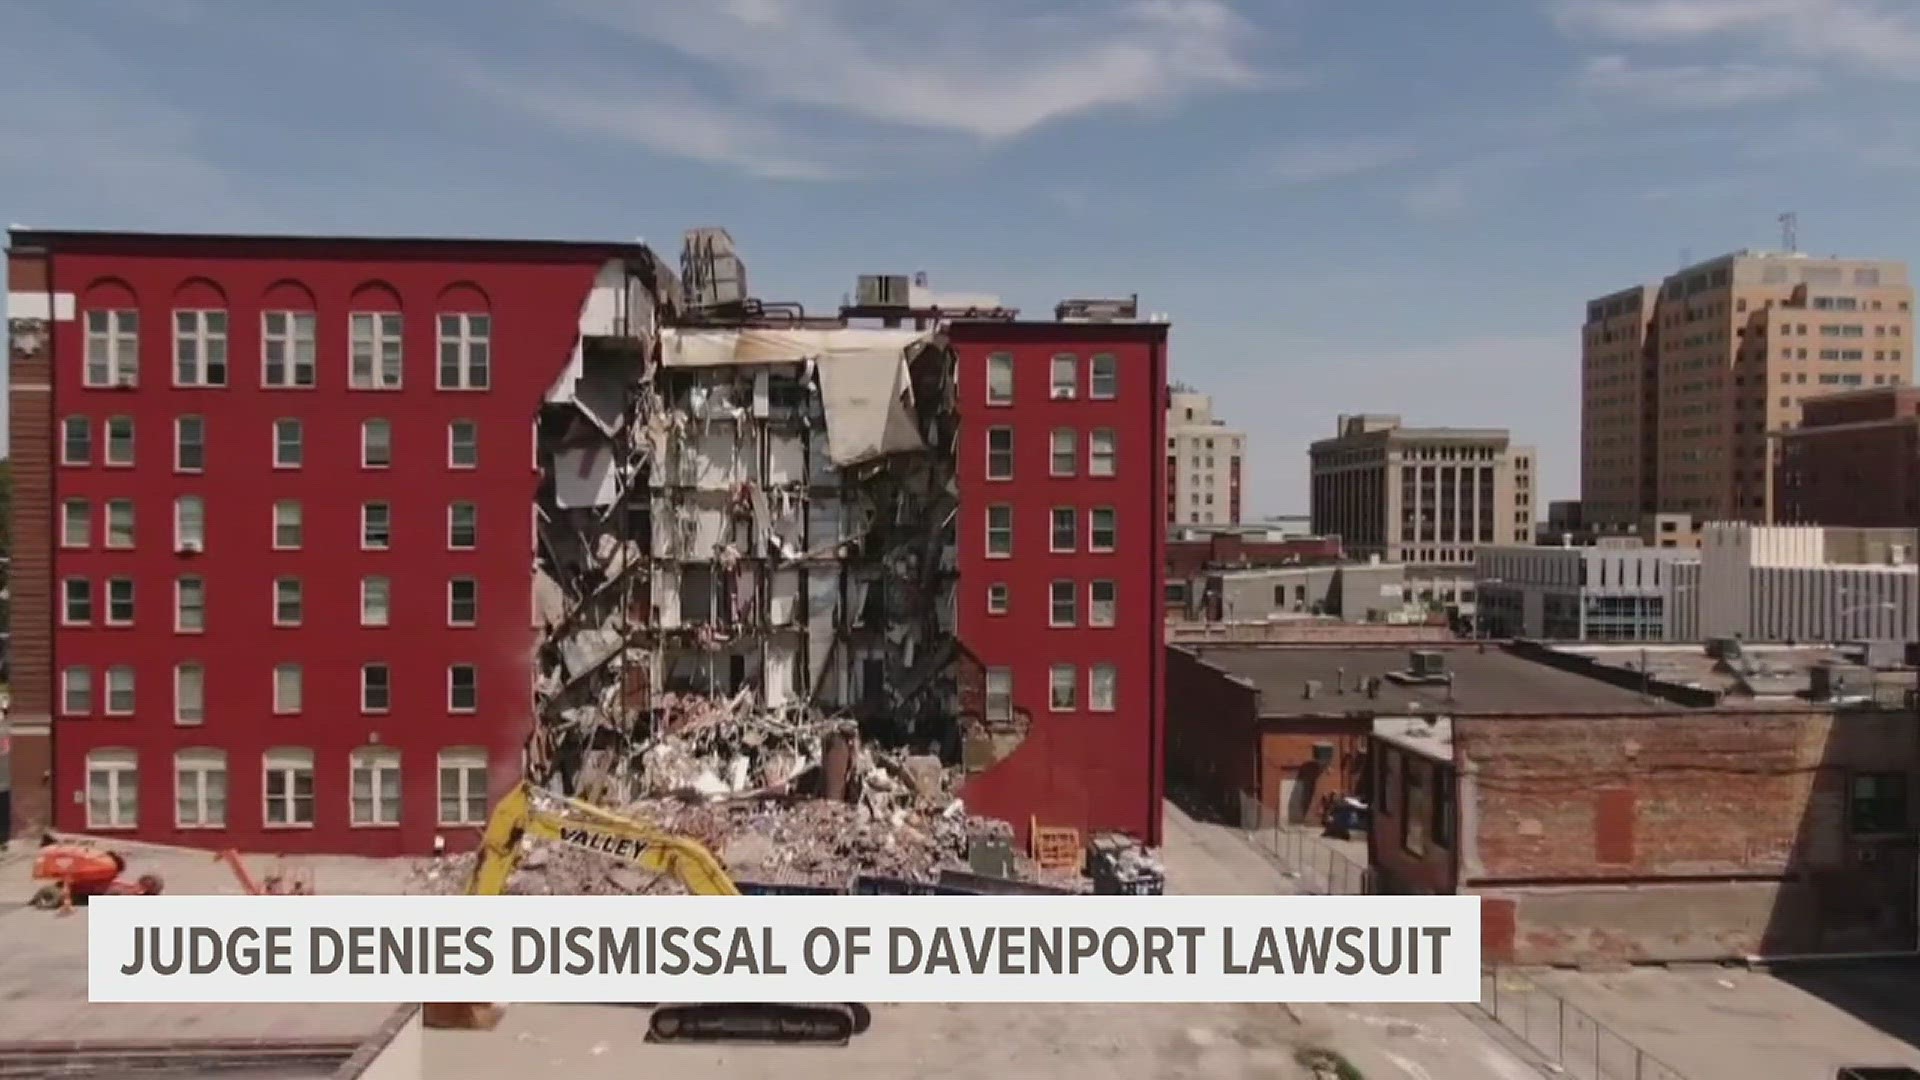 Parkwild Properties and Waukee Investments are previous owners of the building and are listed as defendants in one collapse-related lawsuit.